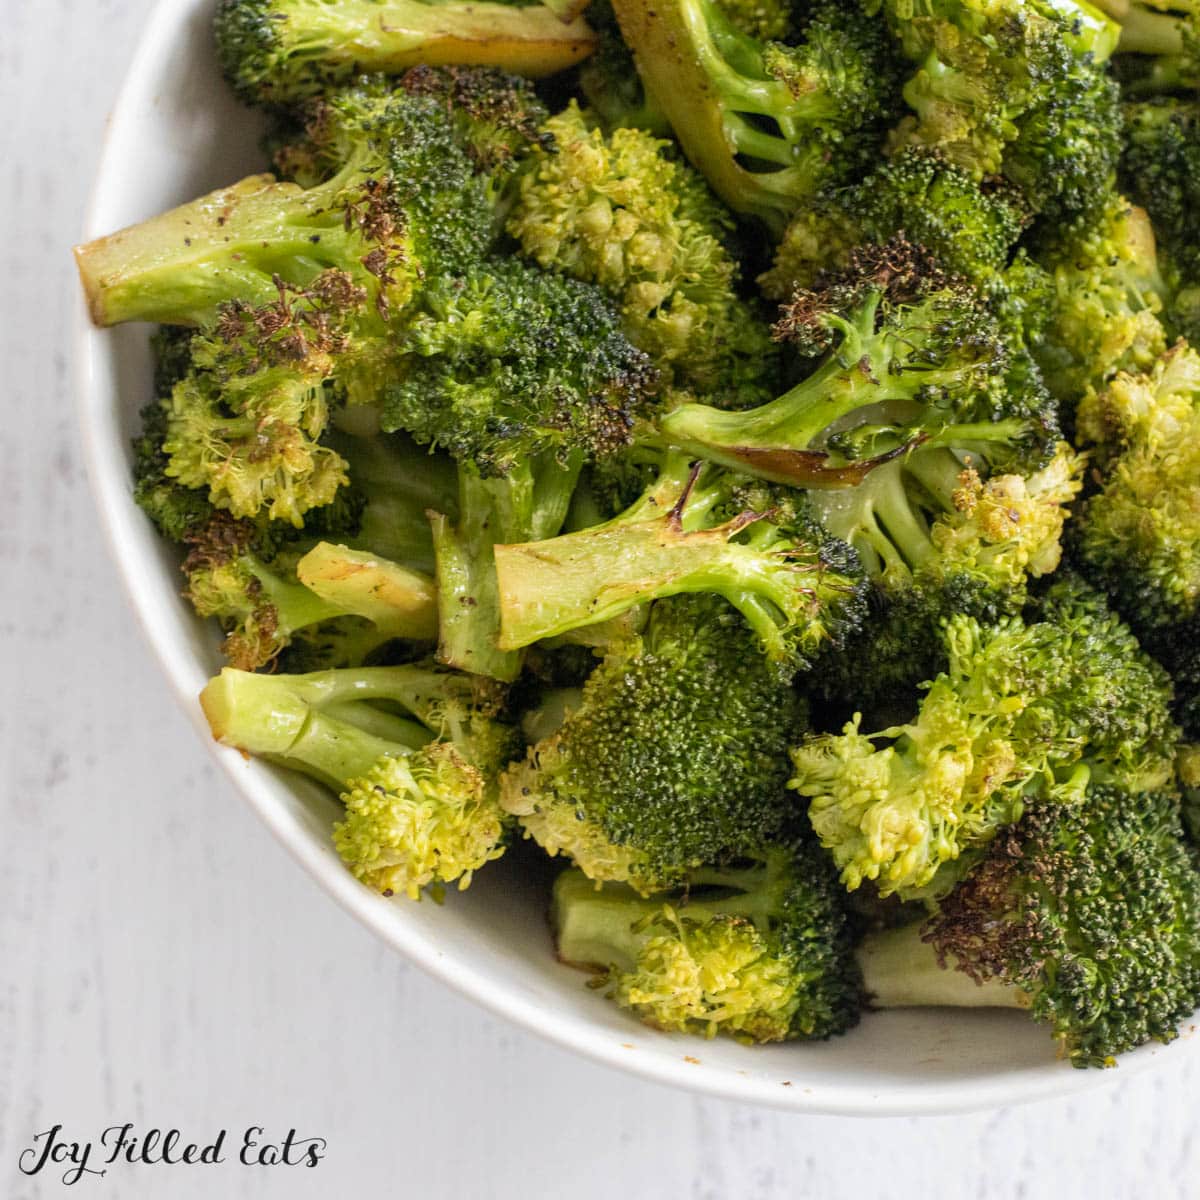 broiled broccoli recipe shown close up in serving bowl